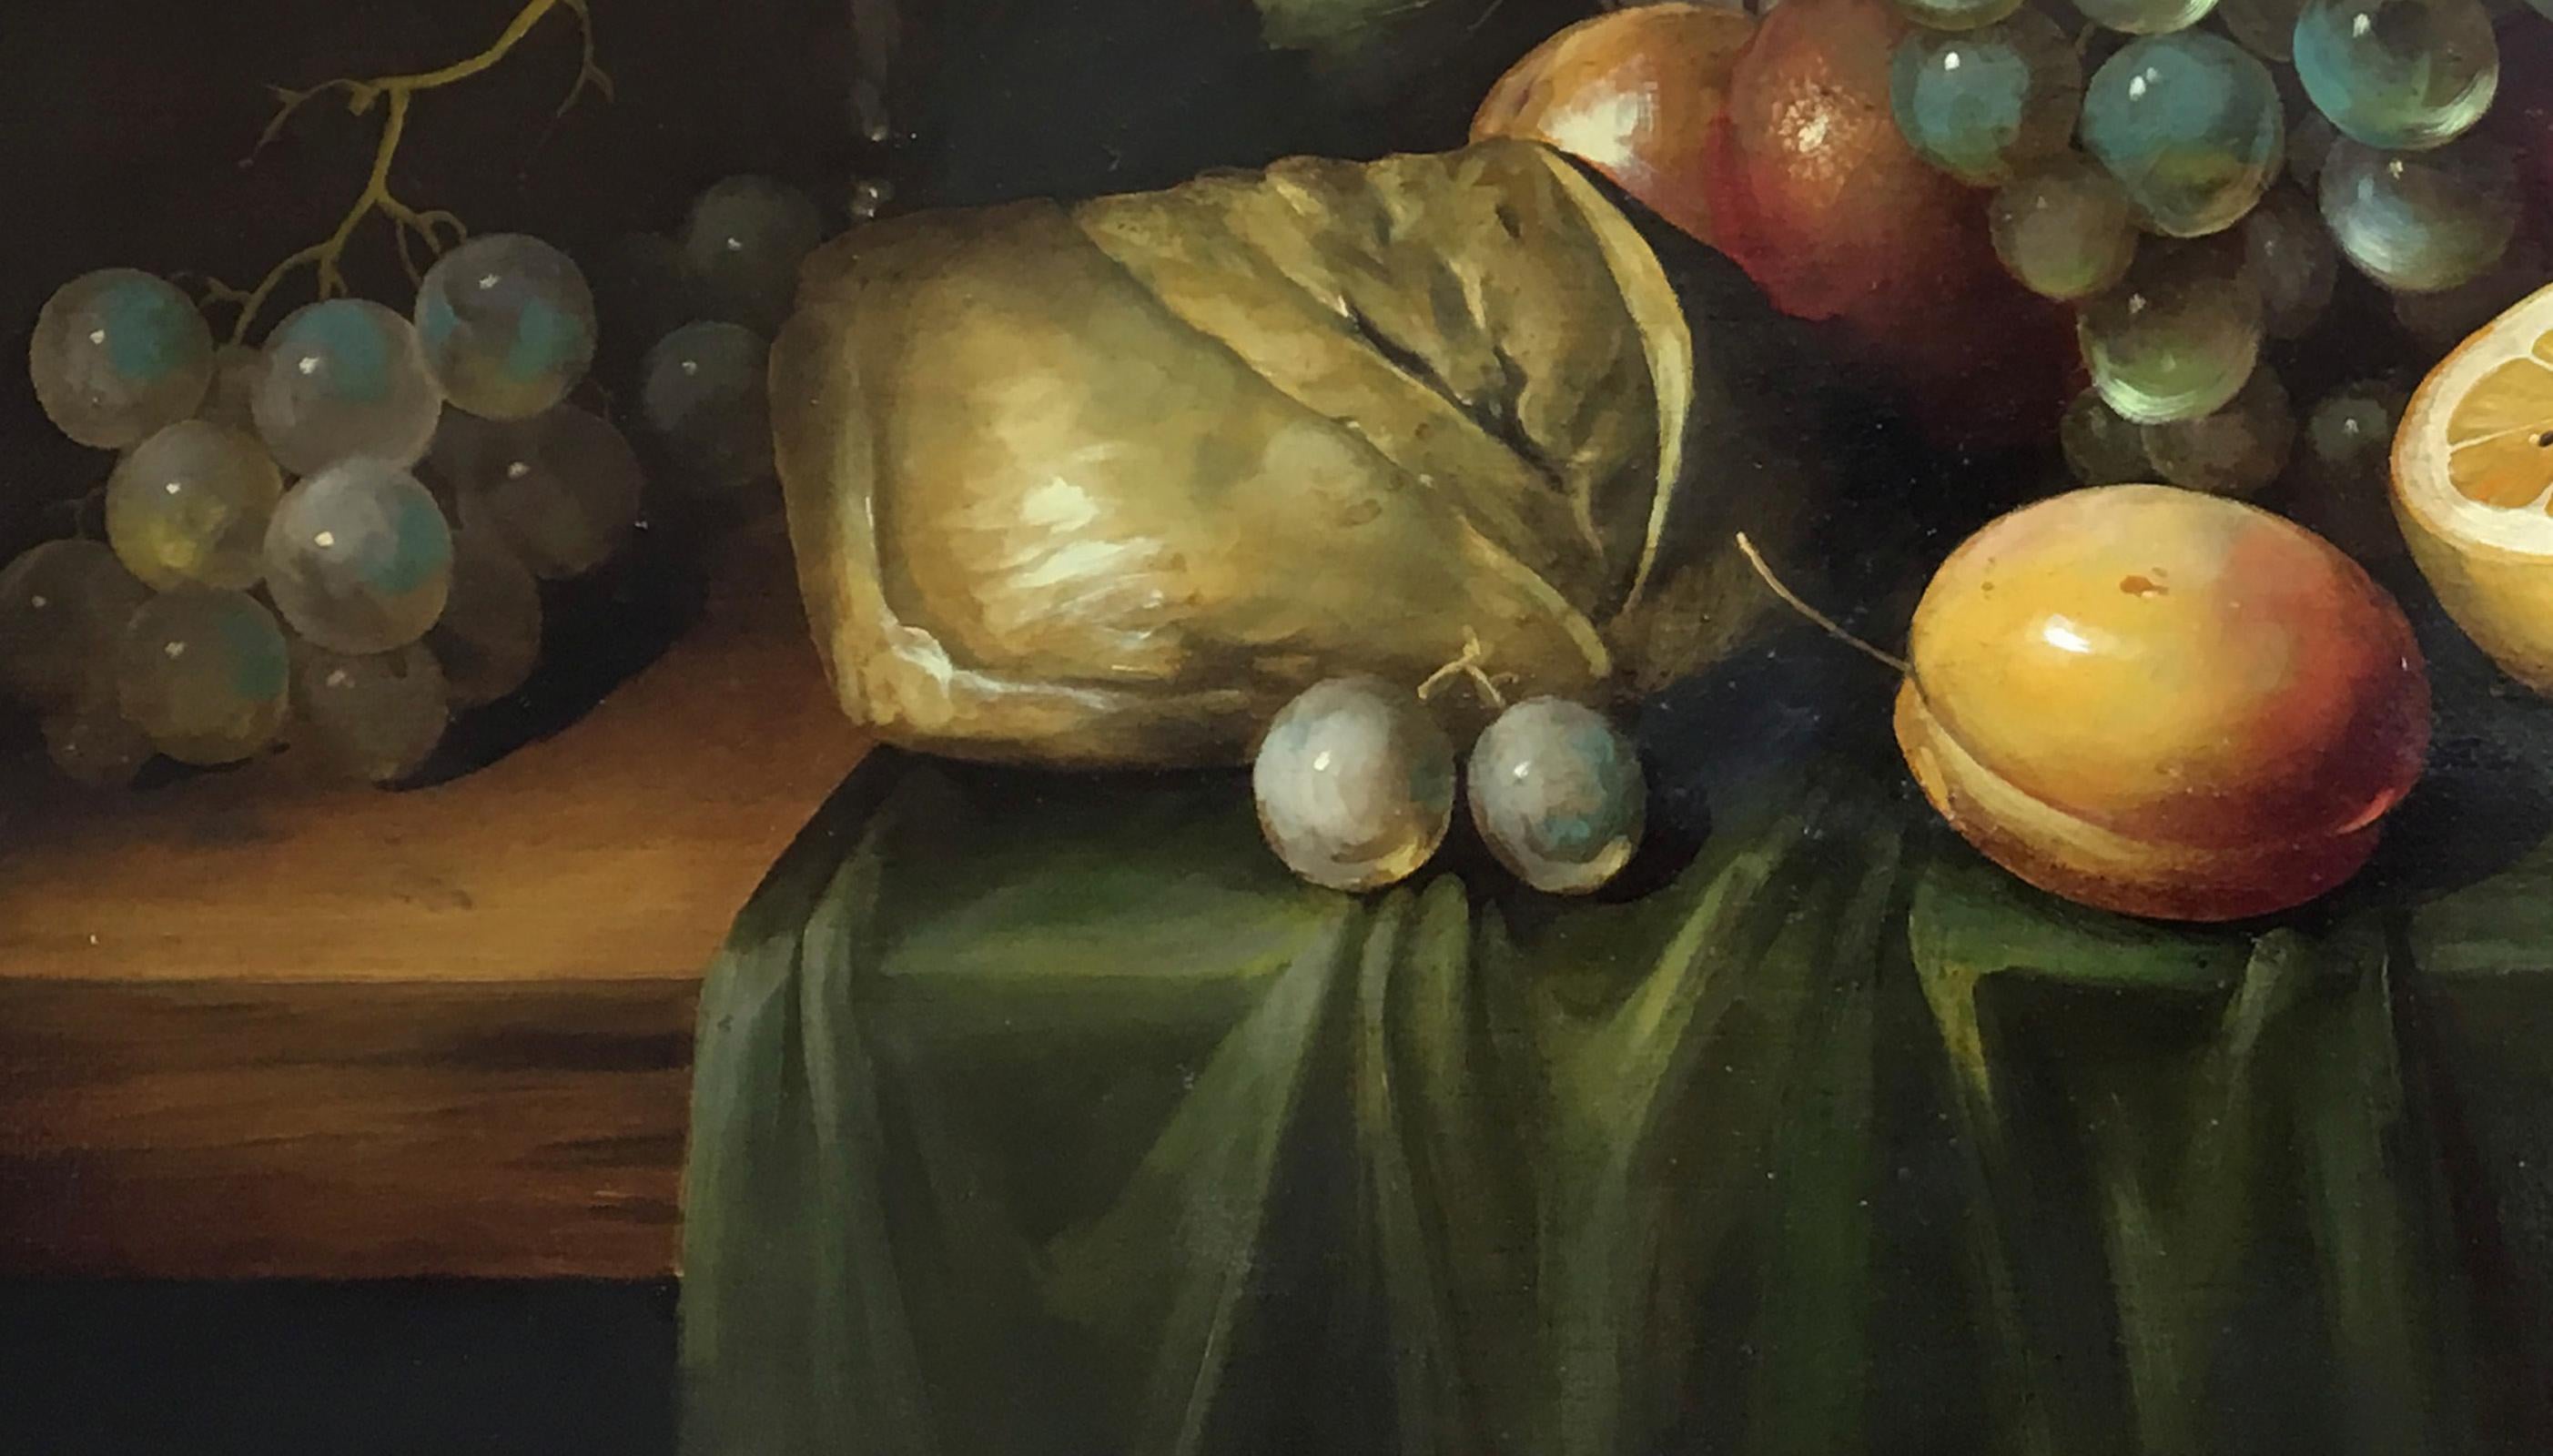 STILL LIFE - Oil on canvas cm.65x75 by Salvatore Marinelli, Italy 2009
A still life with a glass chalice, a finely decorated porcelain plate, grapes, lemons, peaches, prigne, apples, all placed on a wooden table partially covered by a green